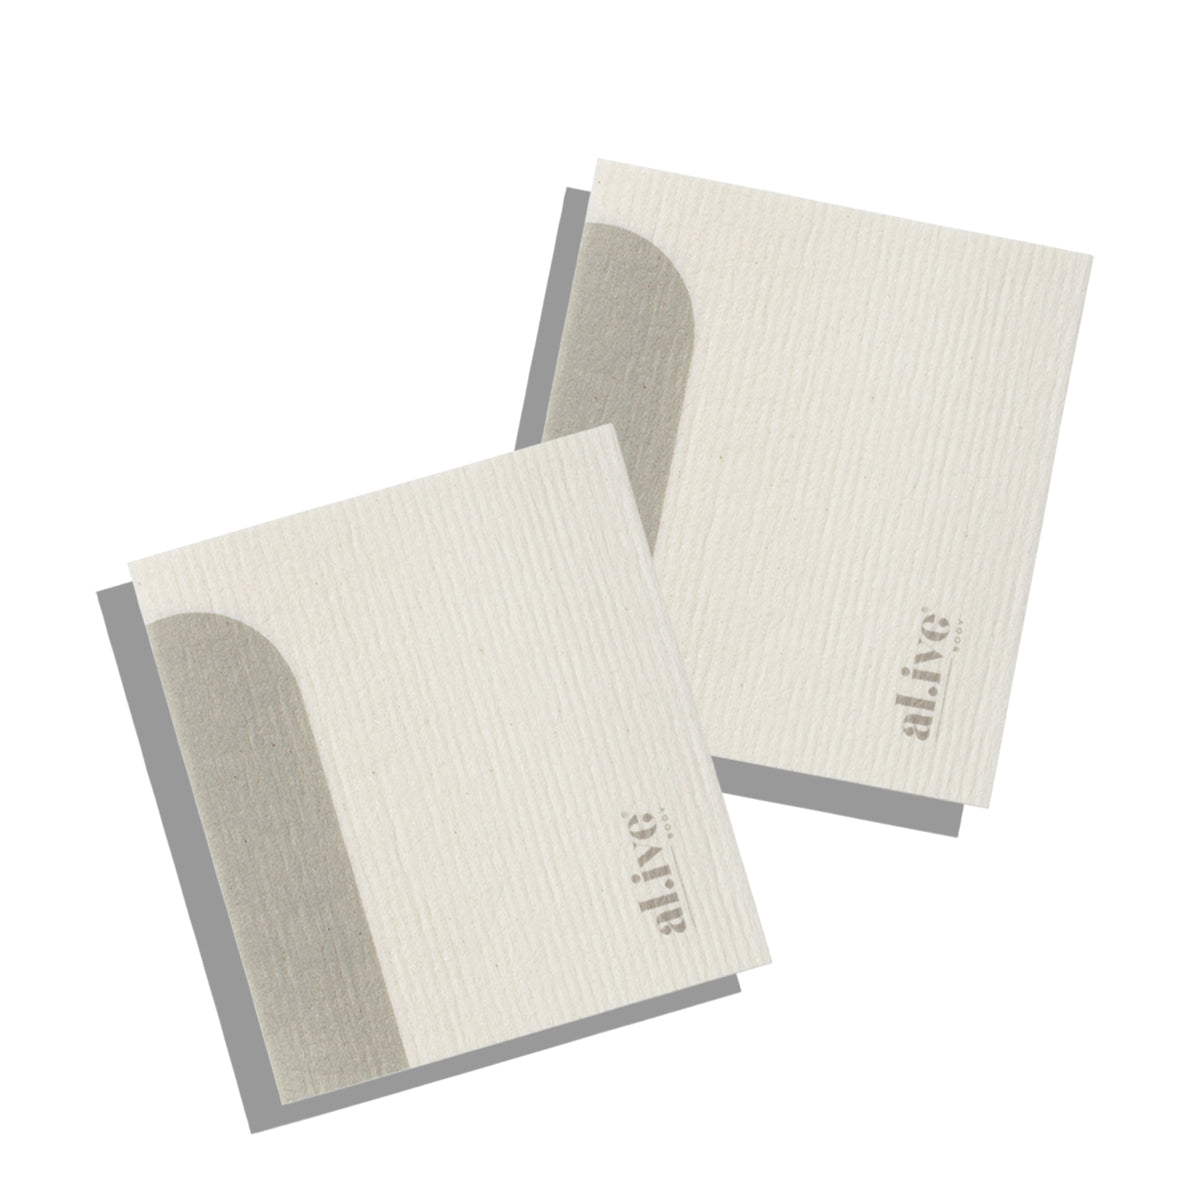 BIODEGRADABLE DISH CLOTH - PACK OF 2